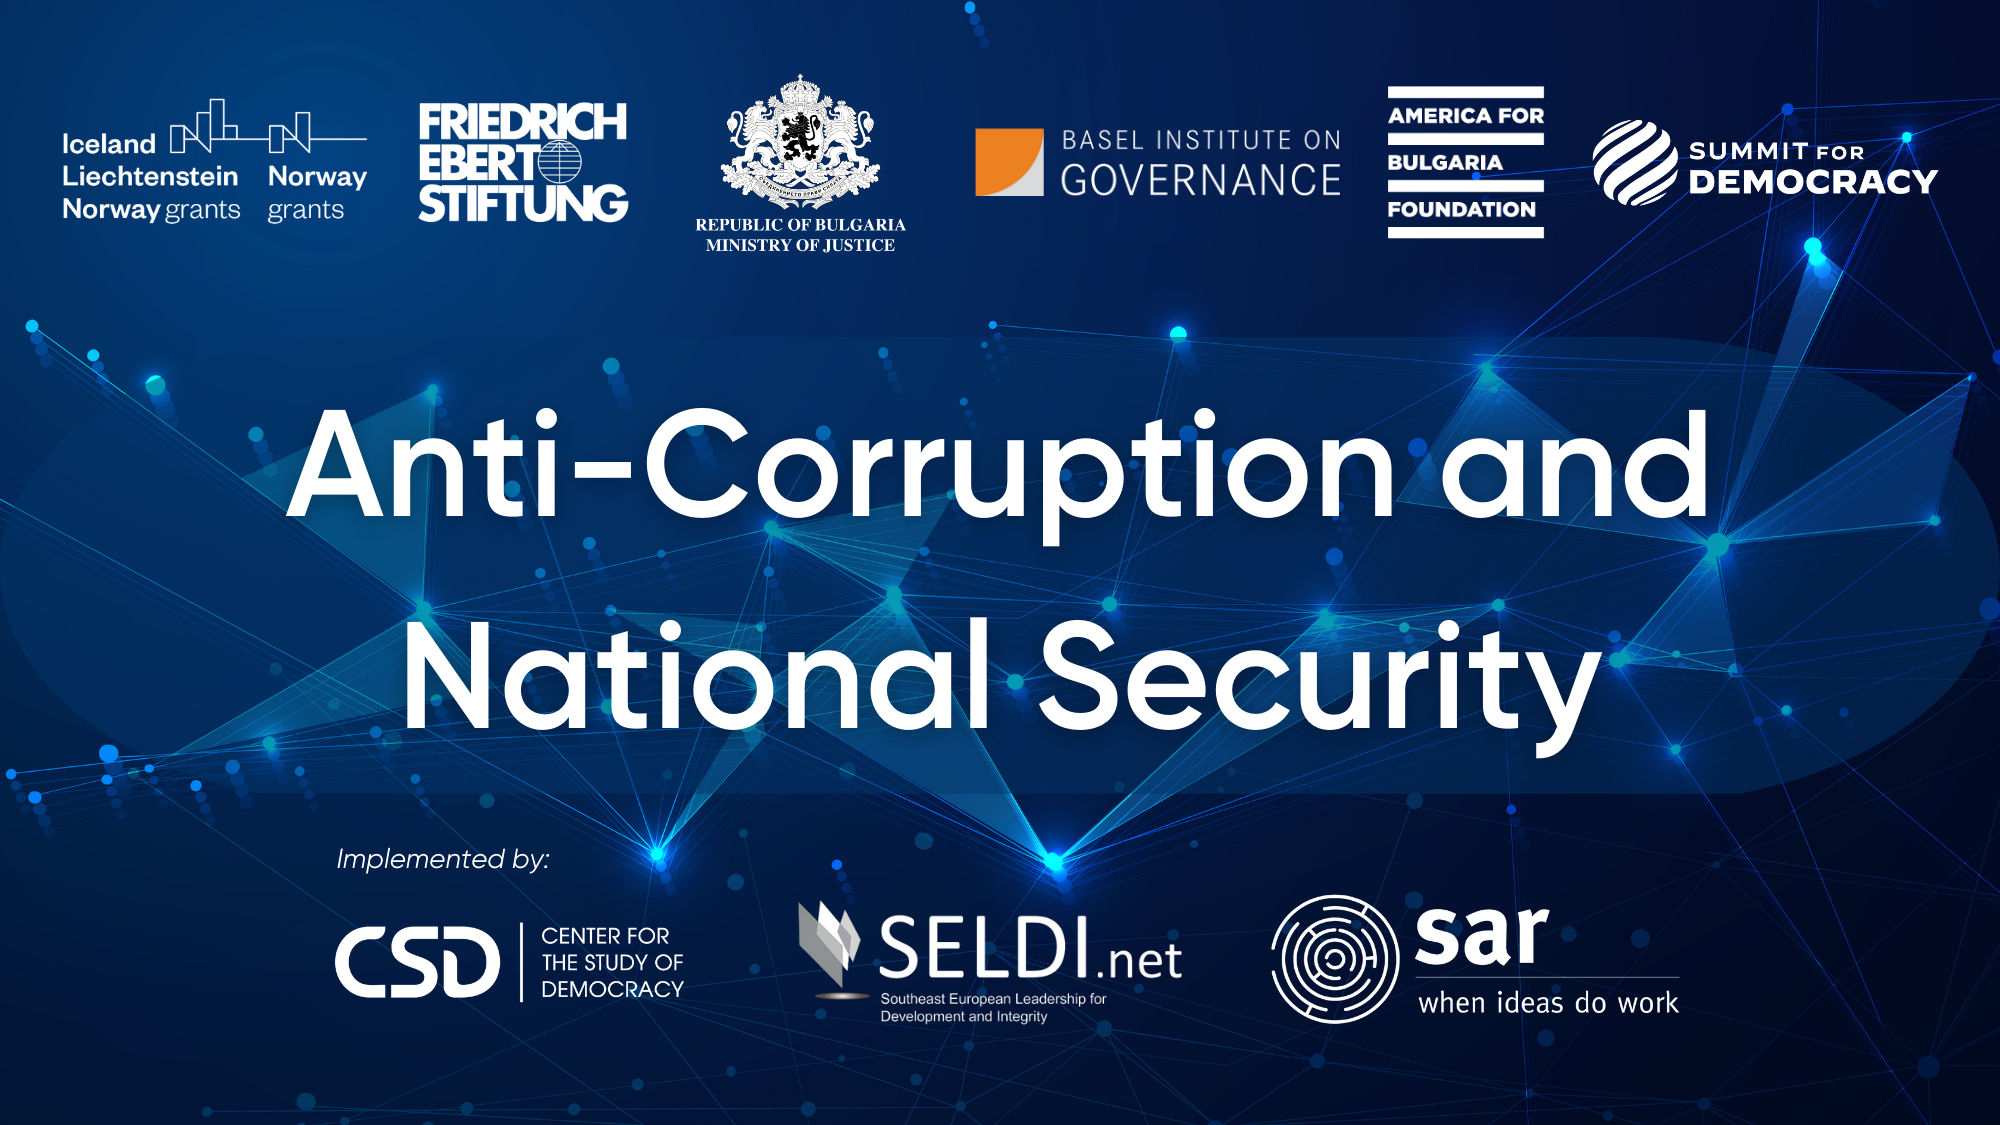 Summit for Democracy event on Anti-Corruption and National Security